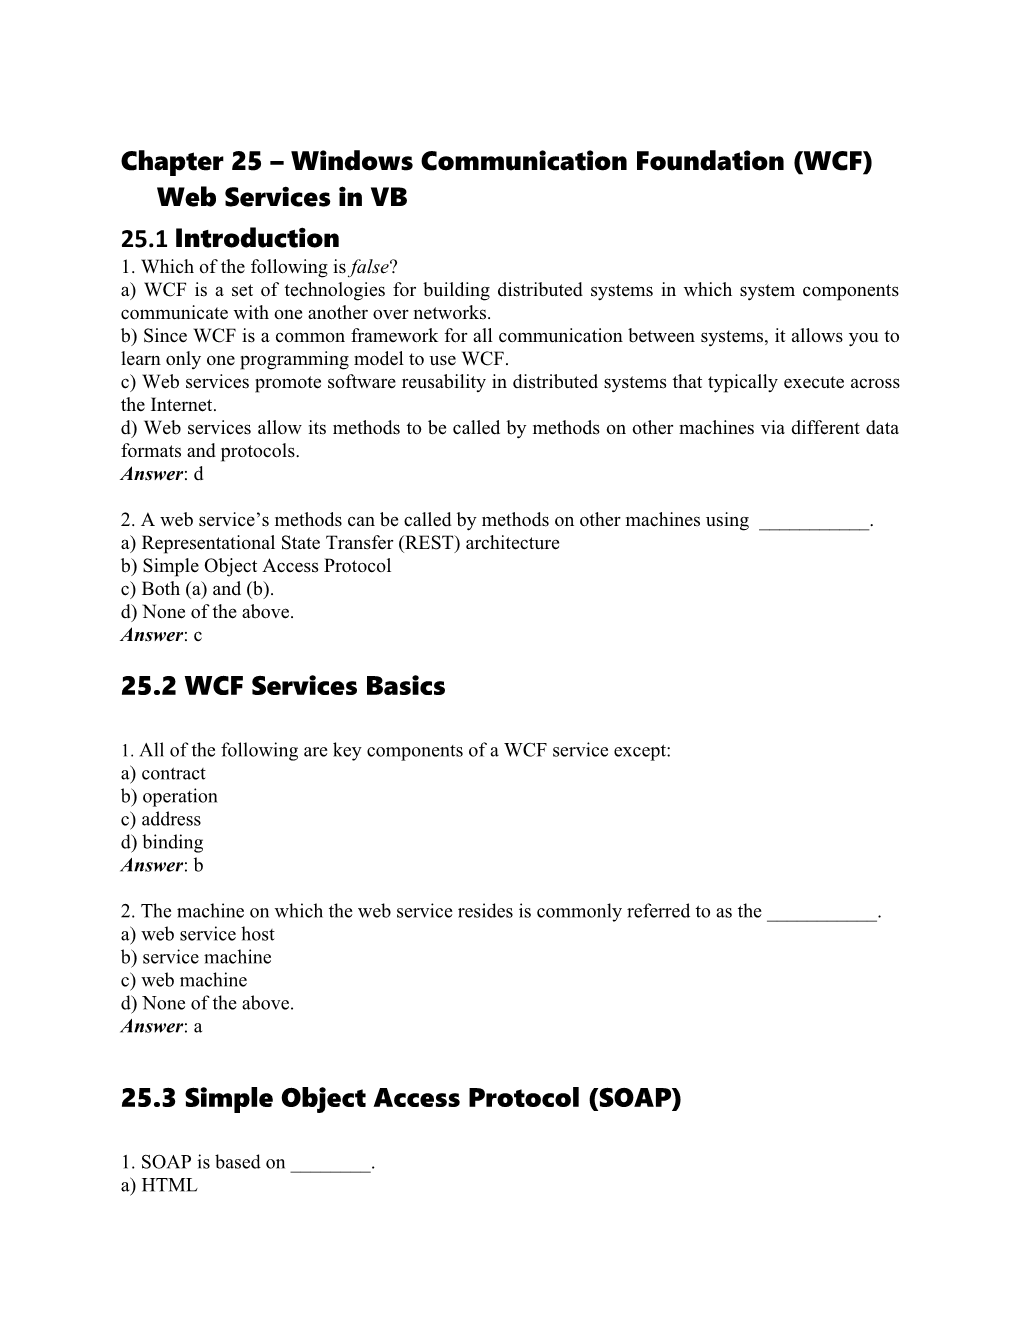 Chapter 25 Windows Communication Foundation (WCF) Web Services in VB